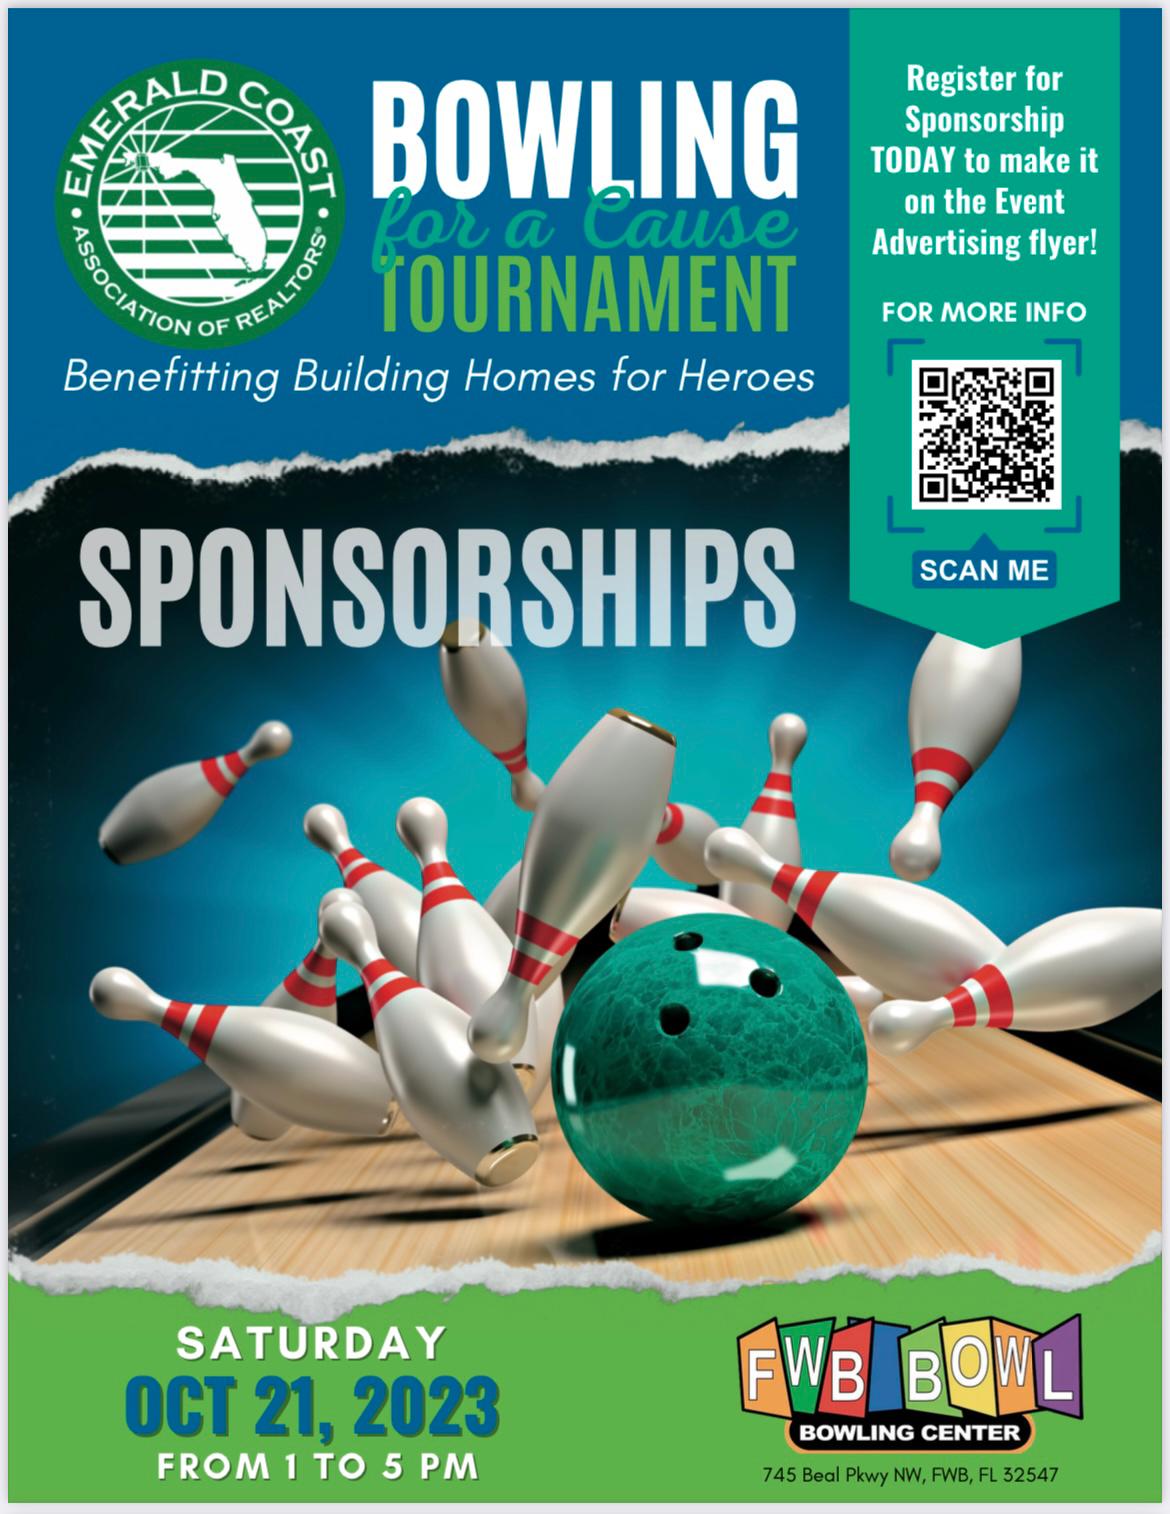 Tourneybowl - Your Home for Bowling Tournaments